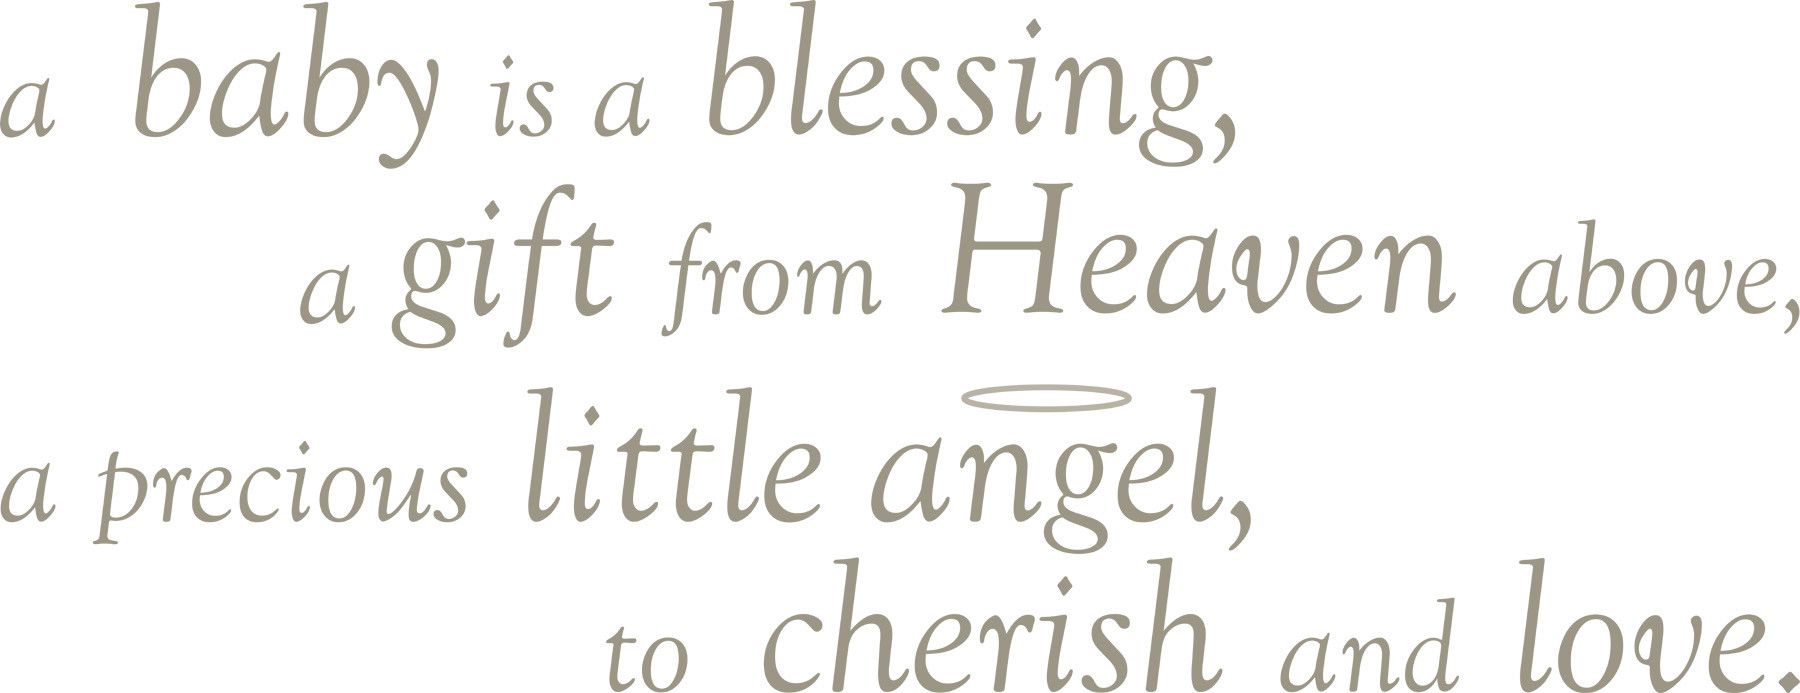 New Baby Blessing Quotes
 Babies Are A Blessing Quotes QuotesGram